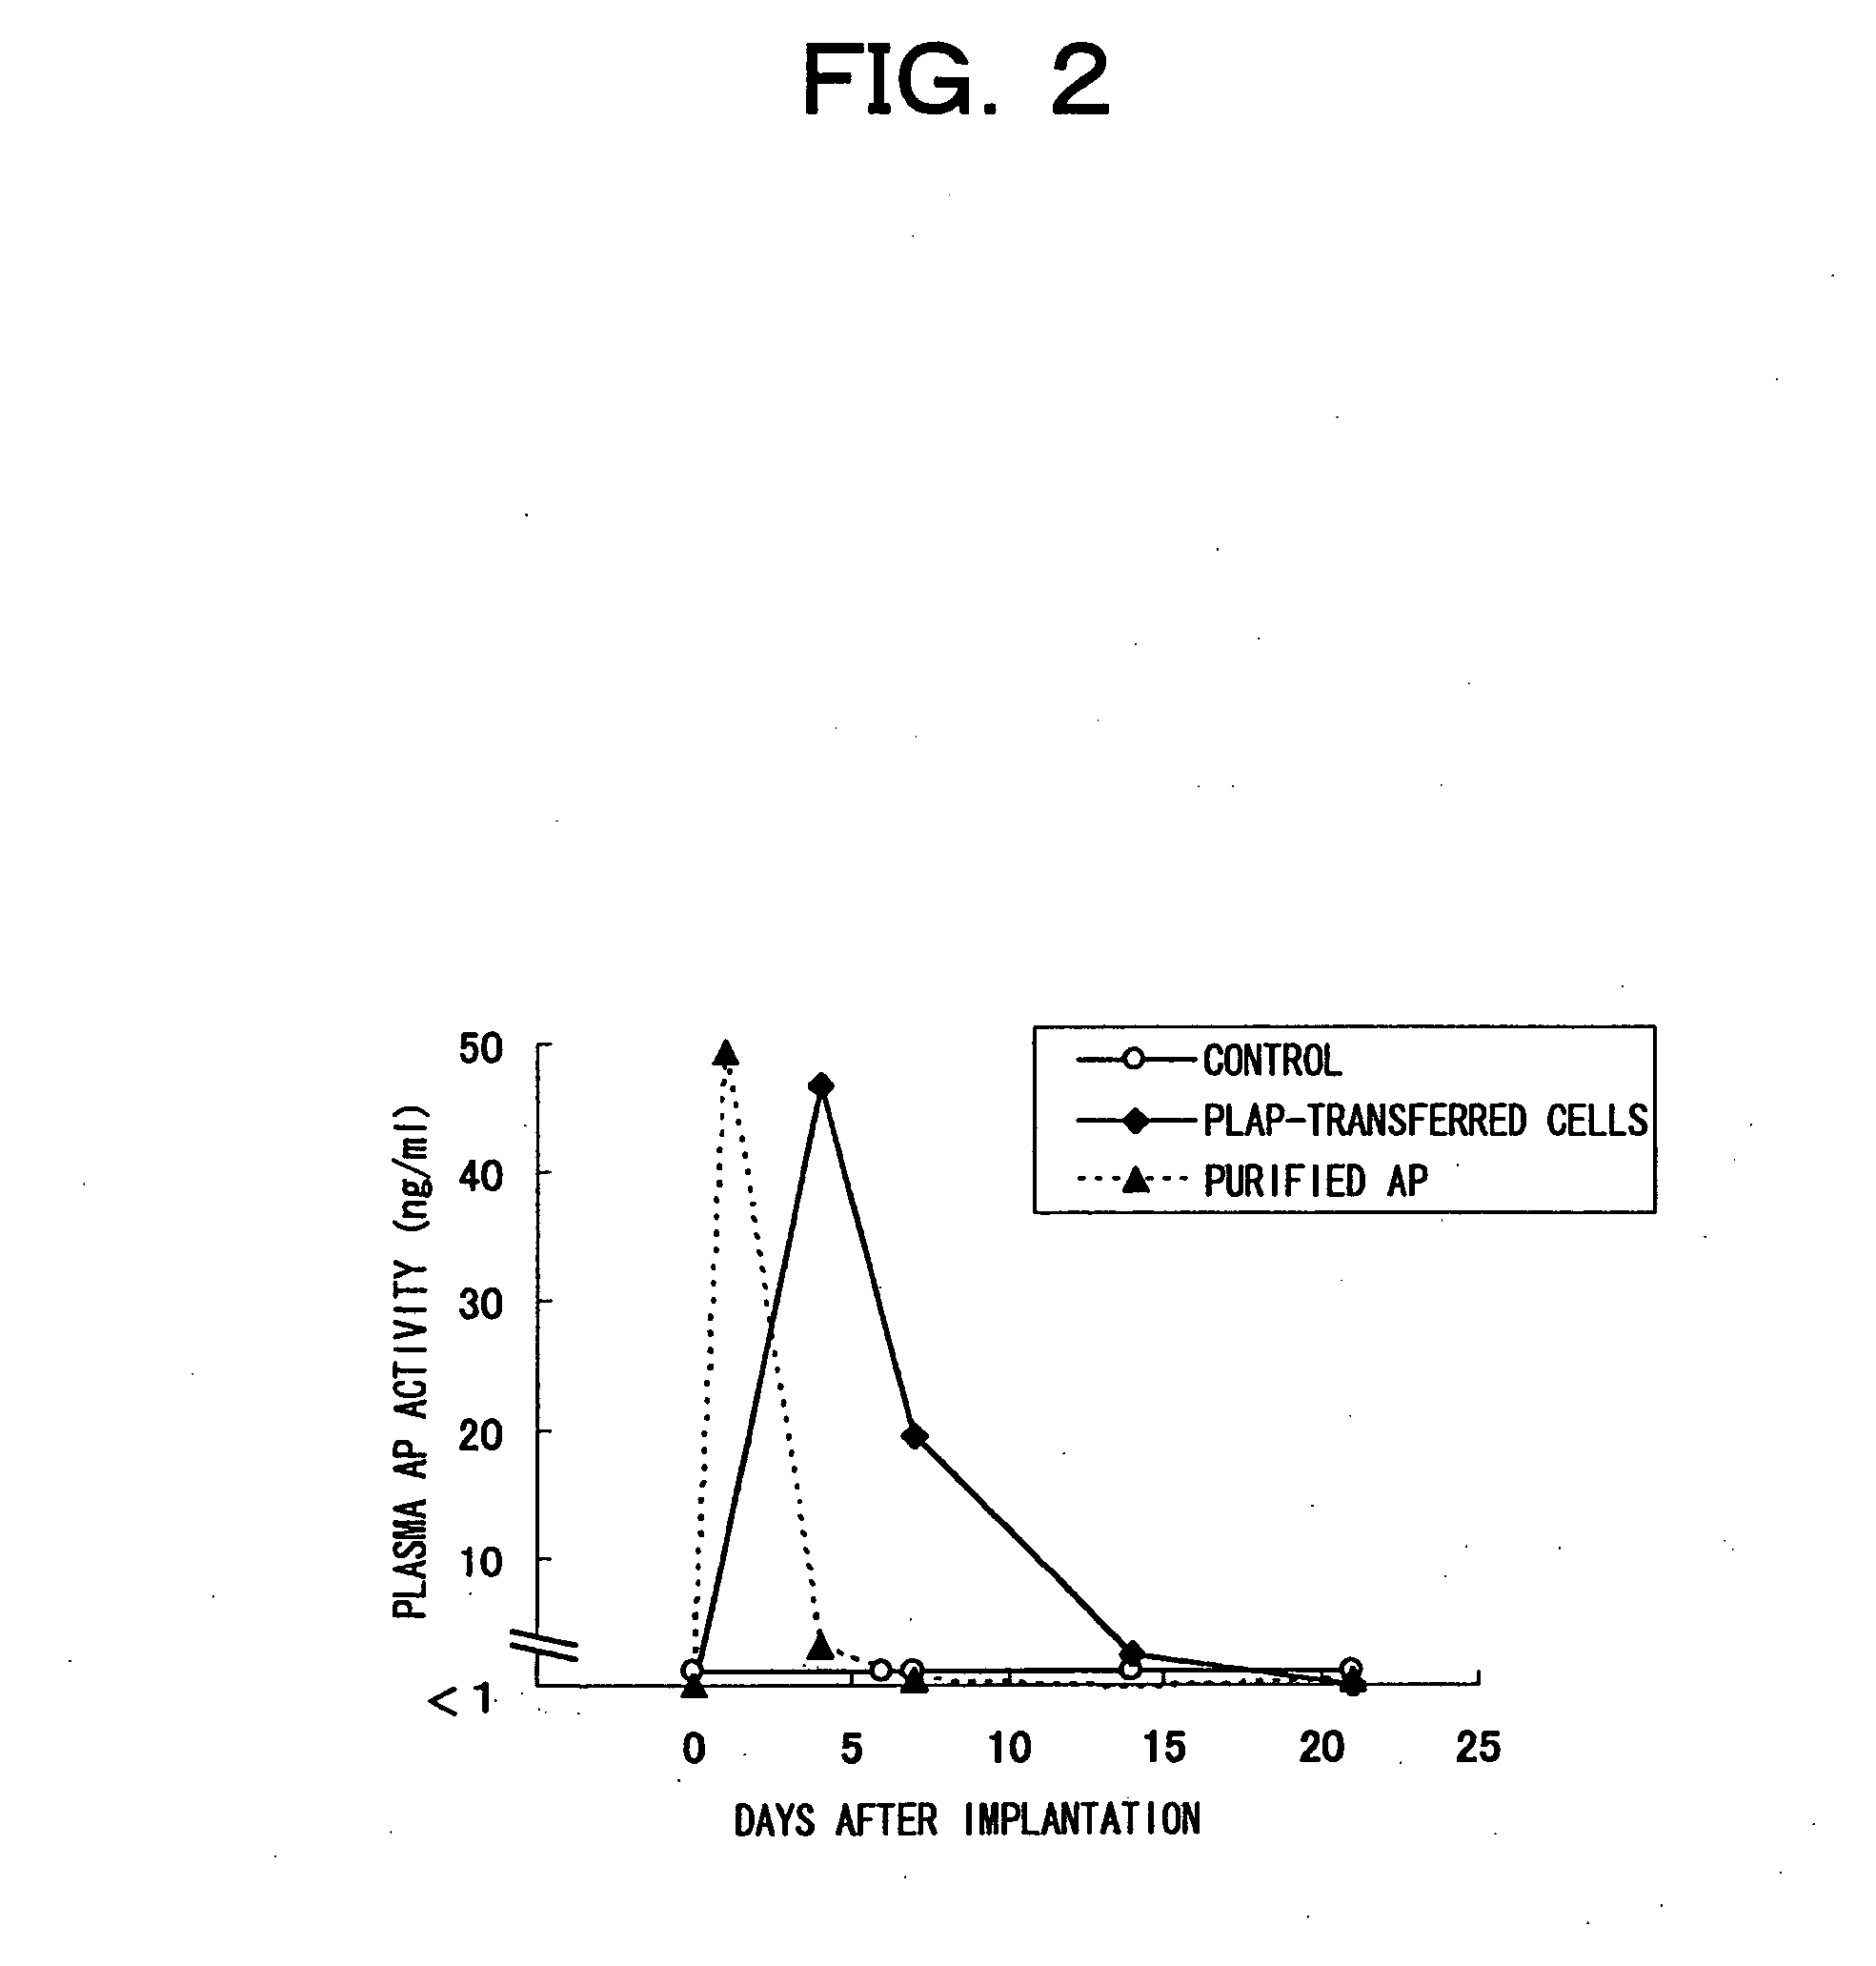 Primarily cultured adipocytes for gene therapy